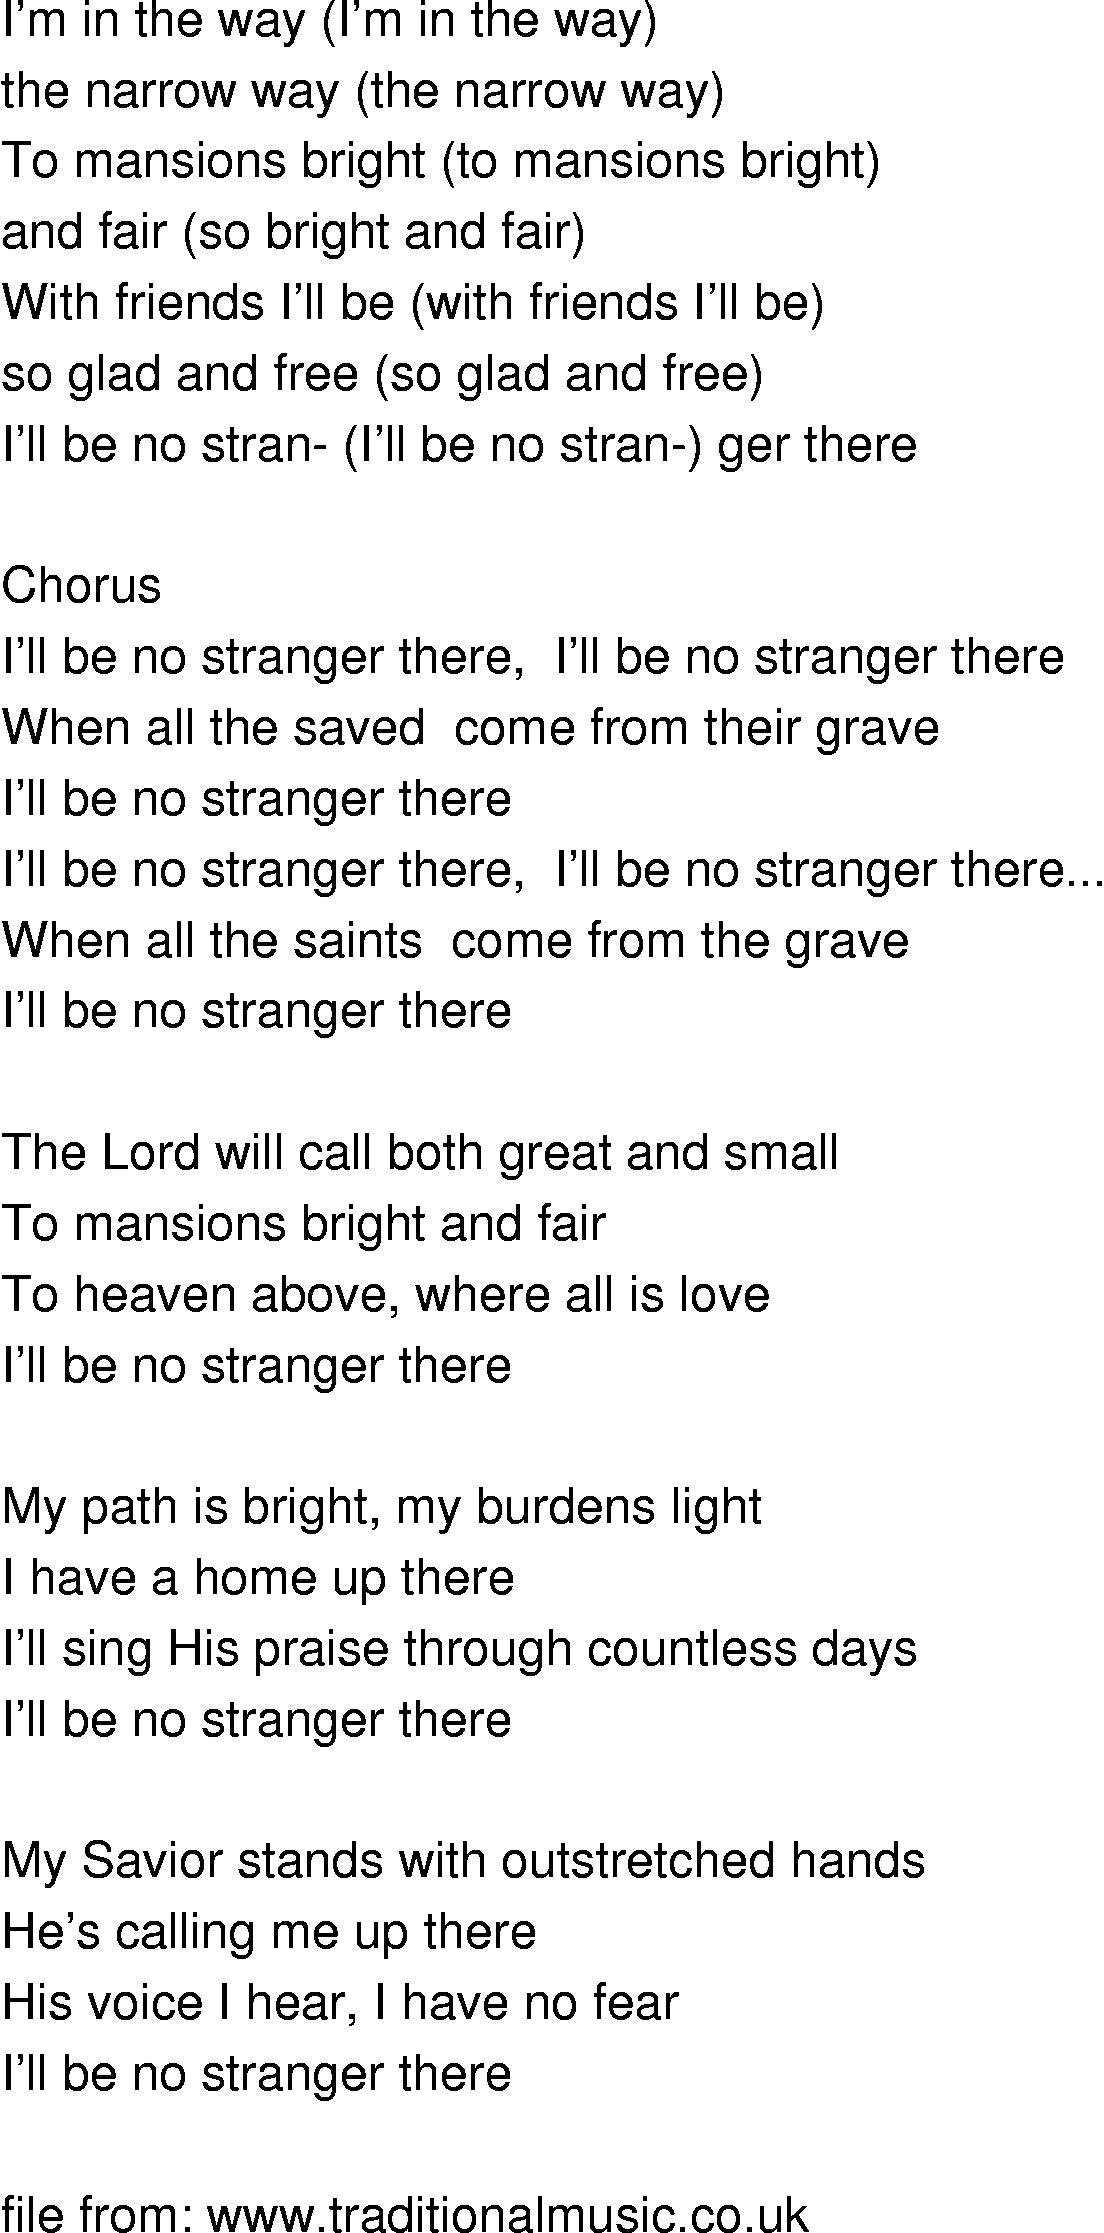 Old-Time (oldtimey) Song Lyrics - ill be no stranger there